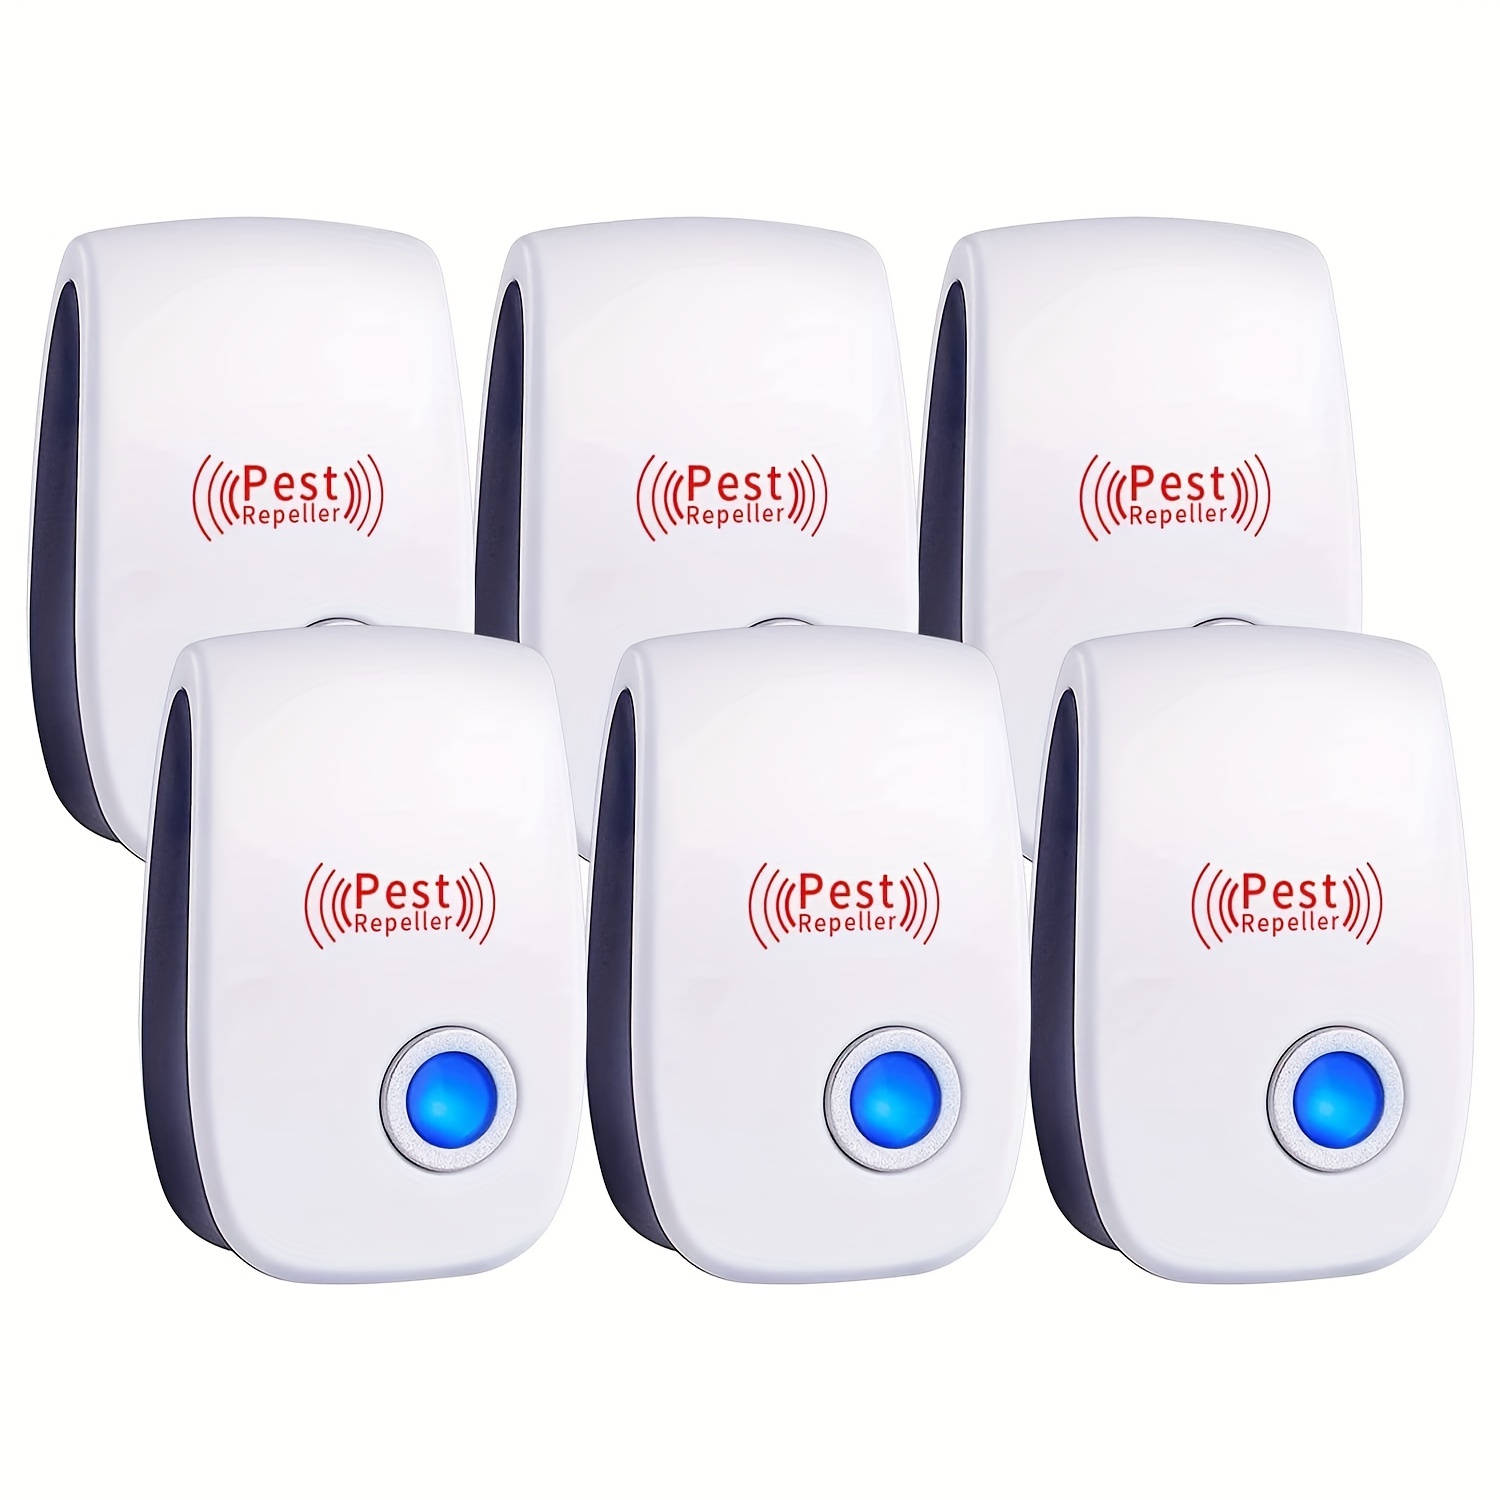 Ultrasonic Pest Repeller Plug in New 2019 Pest Repellent, Power Saving,  Home Indoor and Outdoor Use, Pest Reject 6Pack Rat Repellent, Mice  Repellent